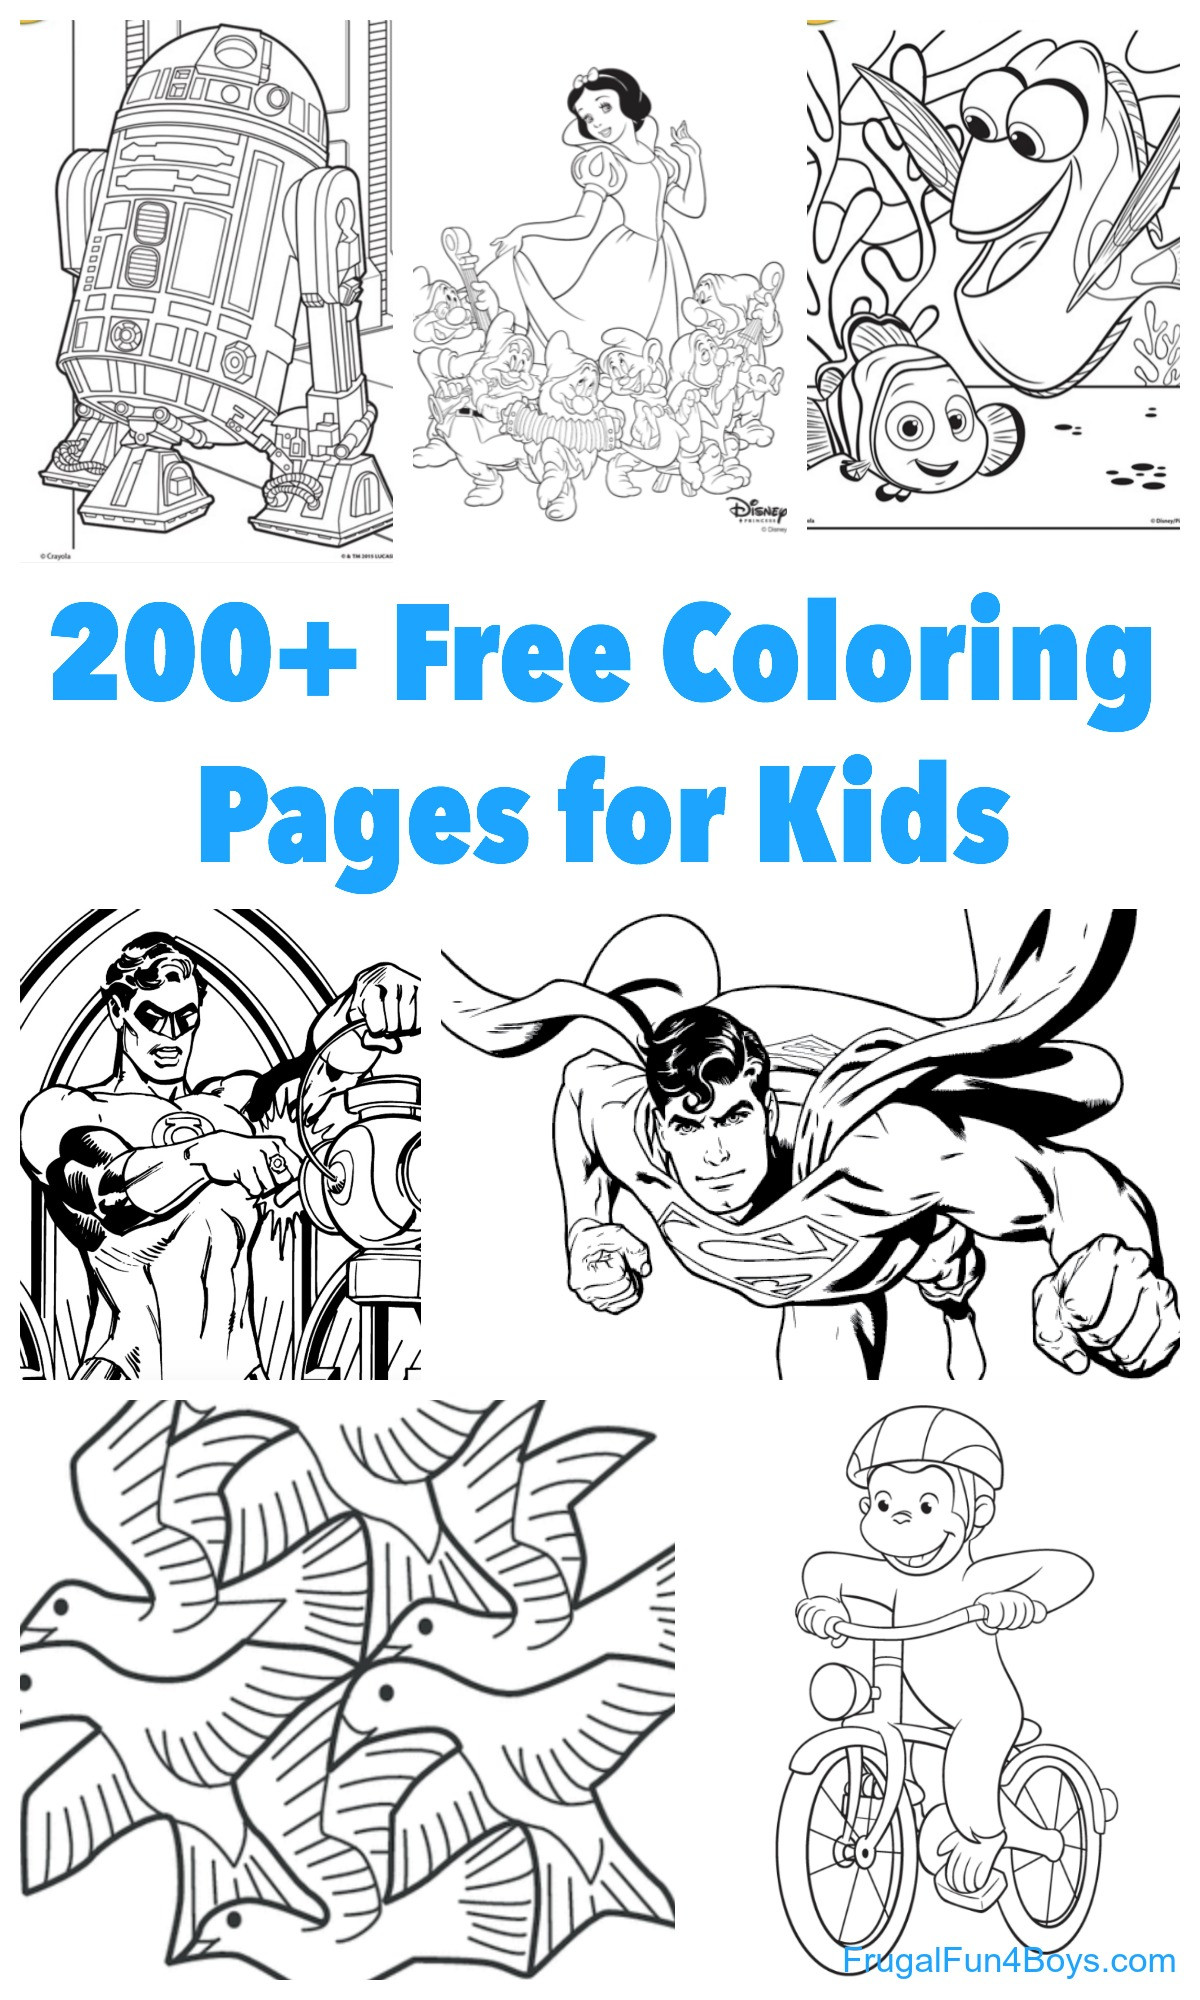 Coloring Pages For Girls To Print
 200 Printable Coloring Pages for Kids Frugal Fun For